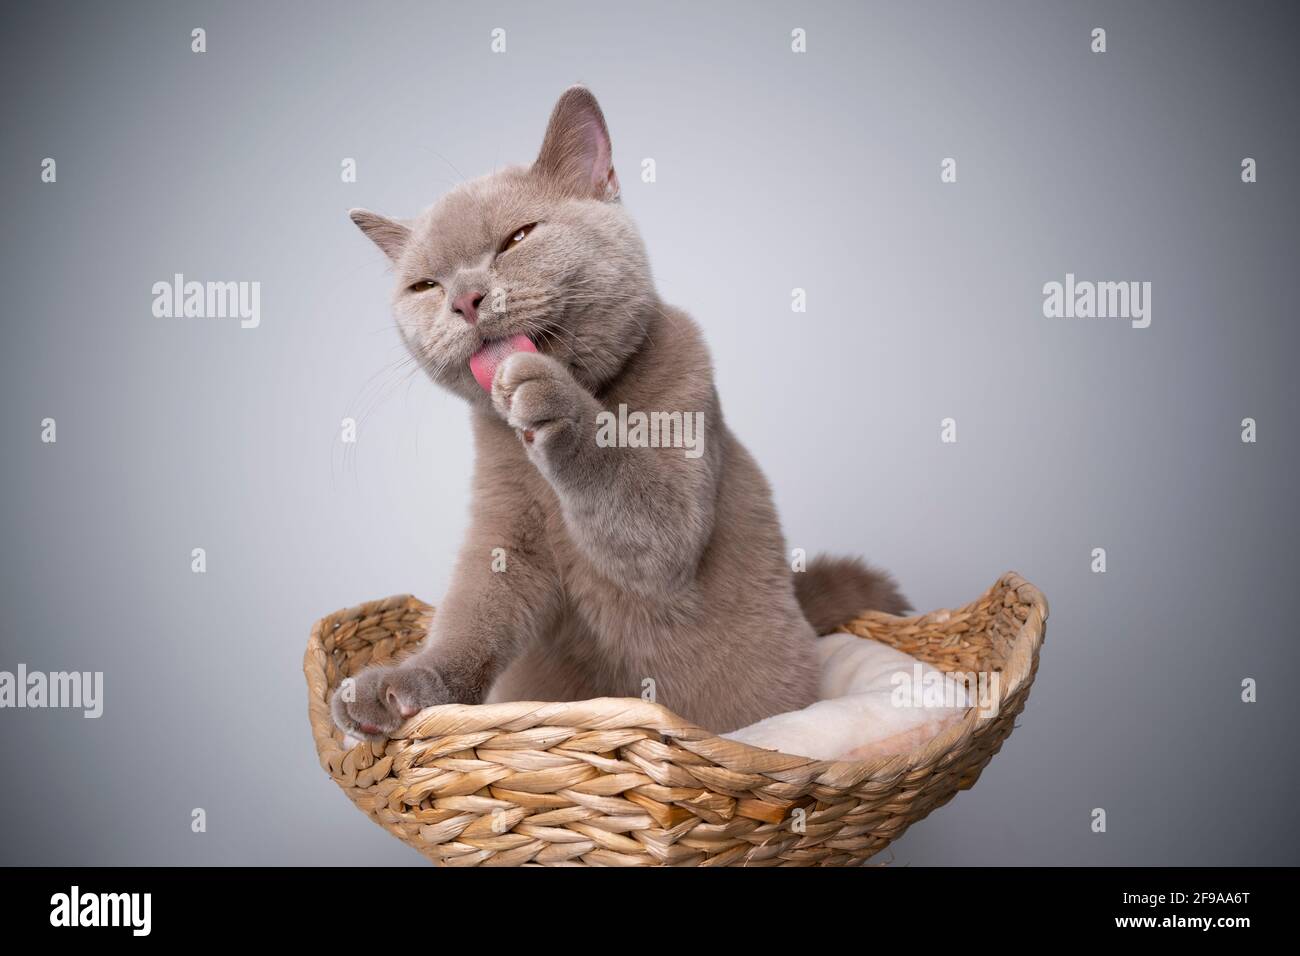 6 month old lilac british shorthair kitten sitting on scratching post grooming licking paw Stock Photo